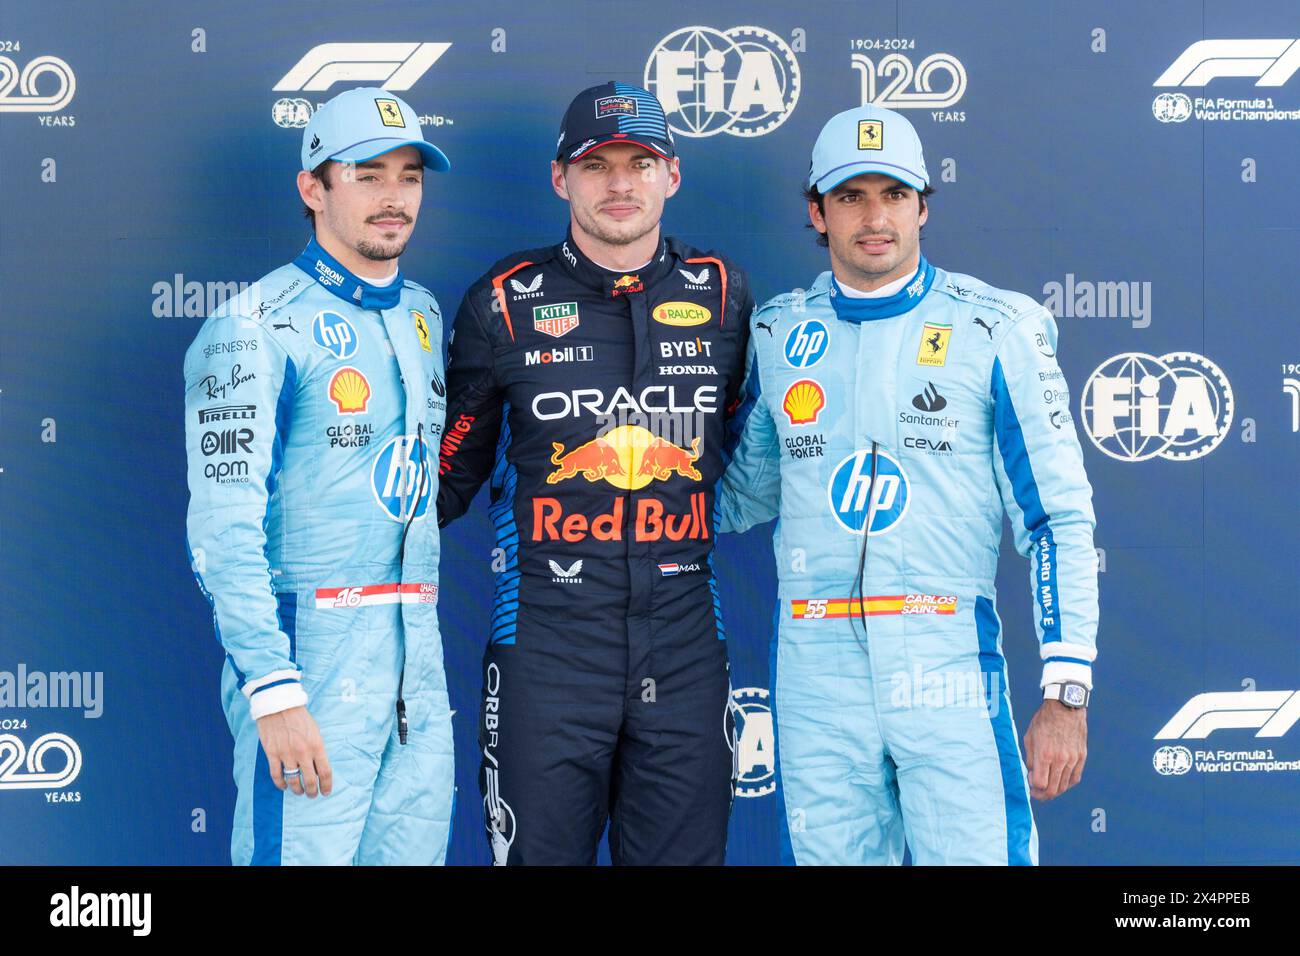 Miami Gardens, United States. 04th May, 2024. Monaco's Formula One driver Charles Leclerc of Scuderia Ferrari, Dutch Formula One driver Max Verstappen of Red Bull Racing and Spanish Formula One driver Carlos Sainz Jr. of Scuderia Ferrari pose for a photo following qualifying for the Formula One Miami Grand Prix at the Miami International Autodrome in Miami Gardens, Florida on Saturday, May 4, 2024 Photo by Greg Nash/UPI. Credit: UPI/Alamy Live News Stock Photo